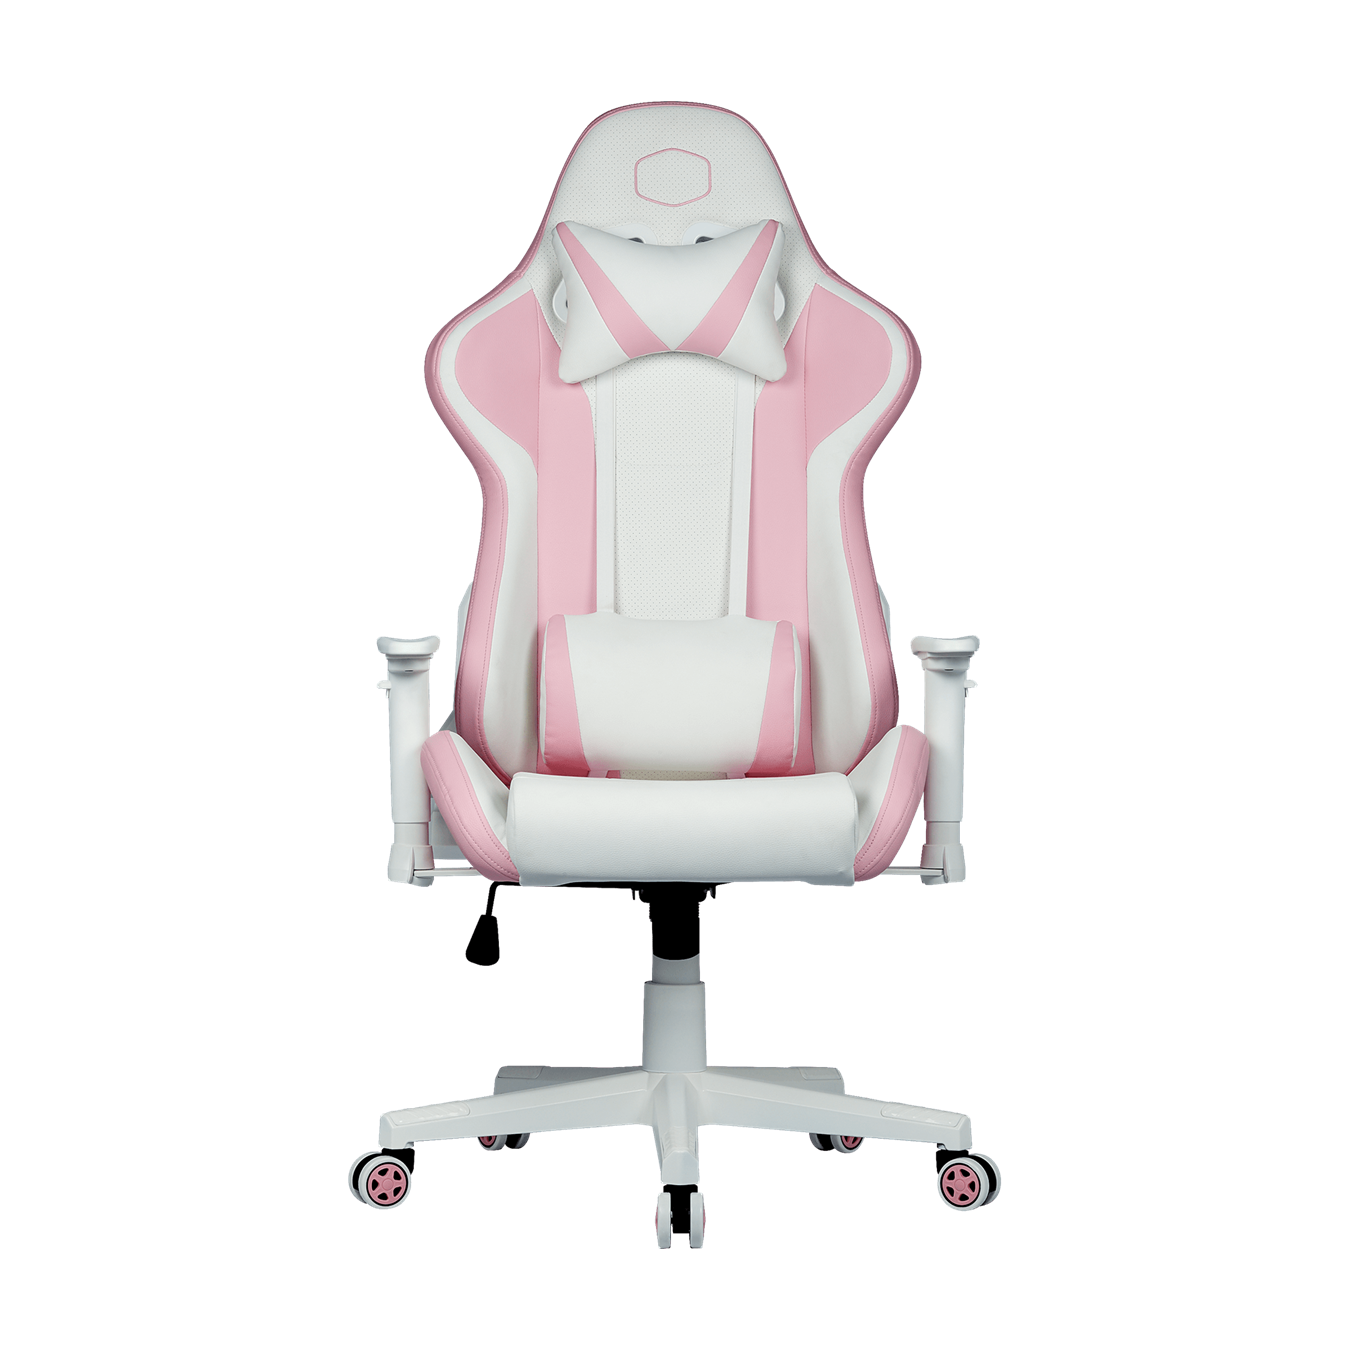 Caliber R1S Rose White Edition Gaming Chair - Cooler Master Caliber R1S helps you achieve hard quests while staying dry and comfortable.